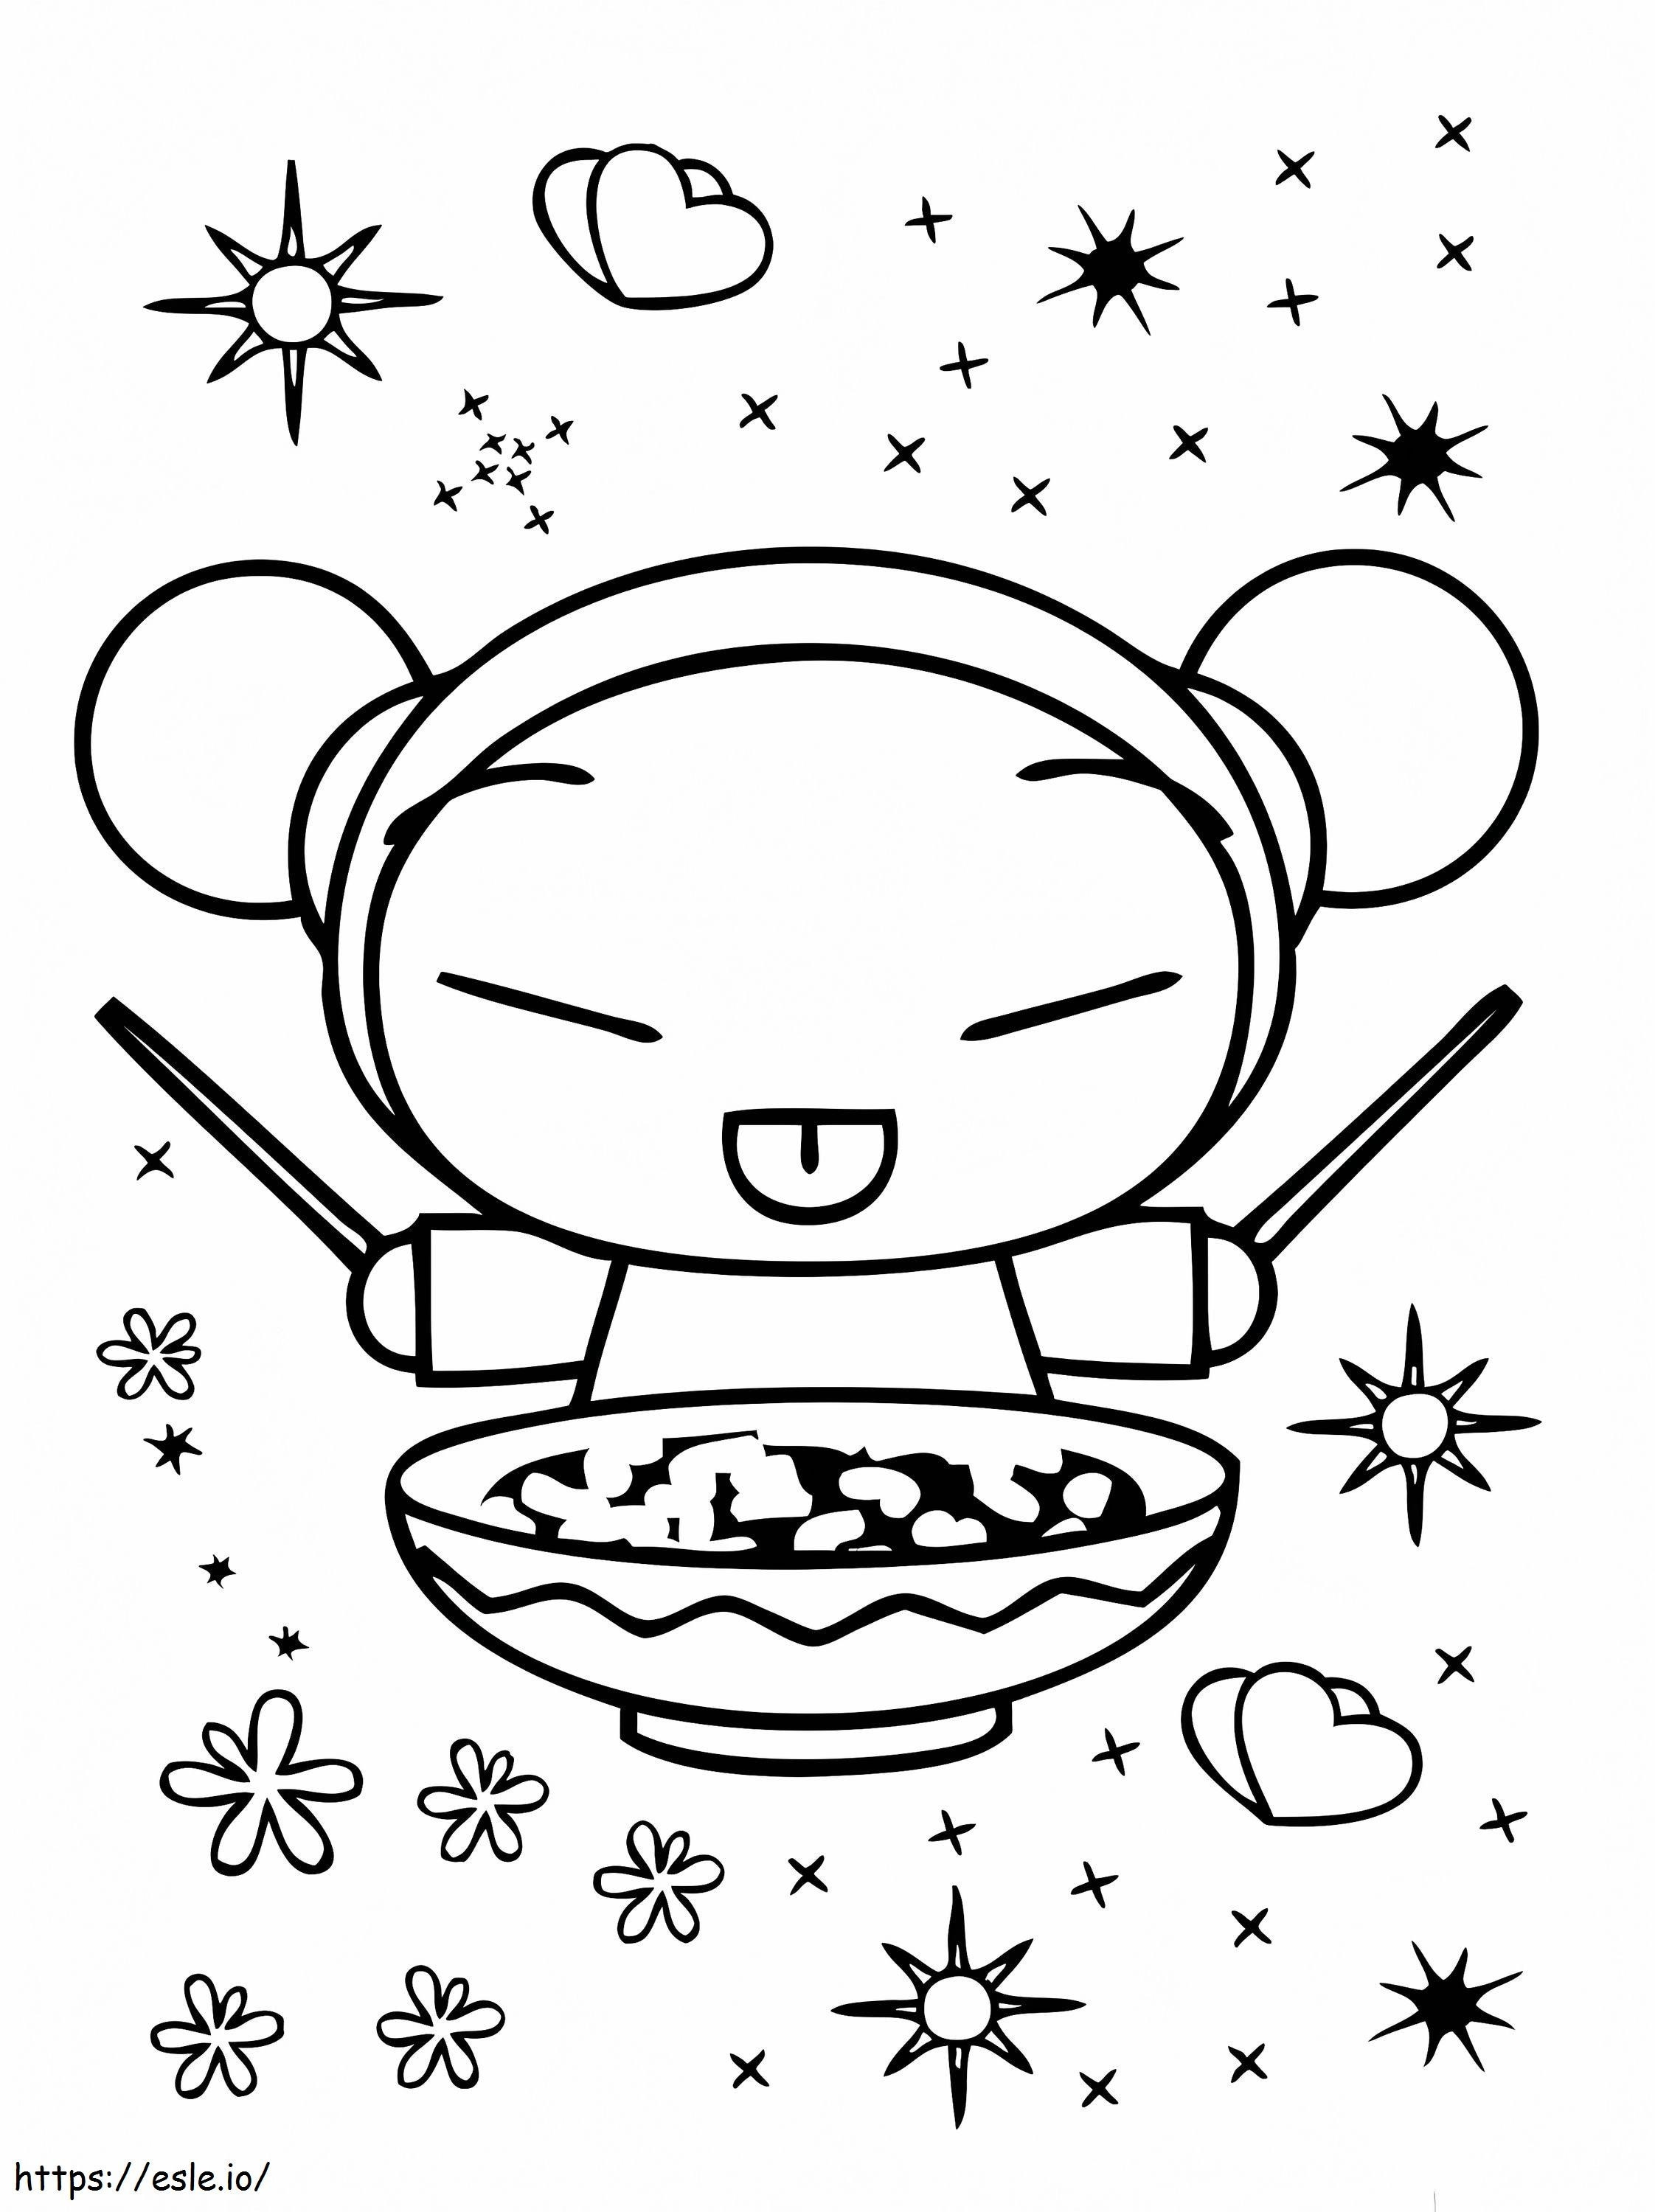 1596241126 Pucca Coloringpage 05 coloring page